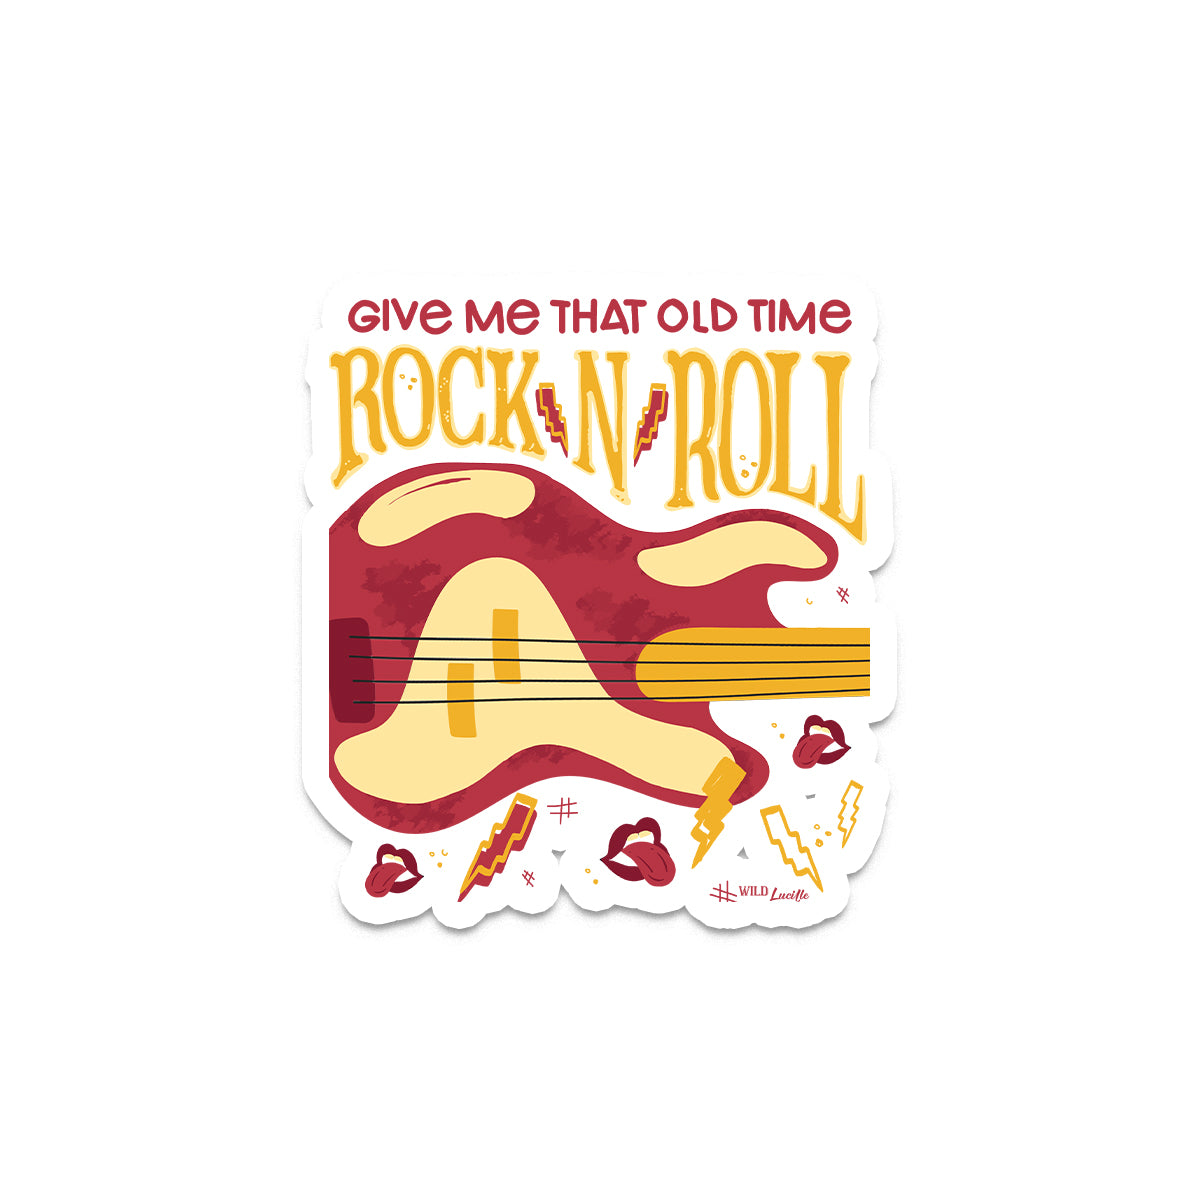 Give Me That Old Time Rock and Roll - Retro Rocker Vinyl Decal